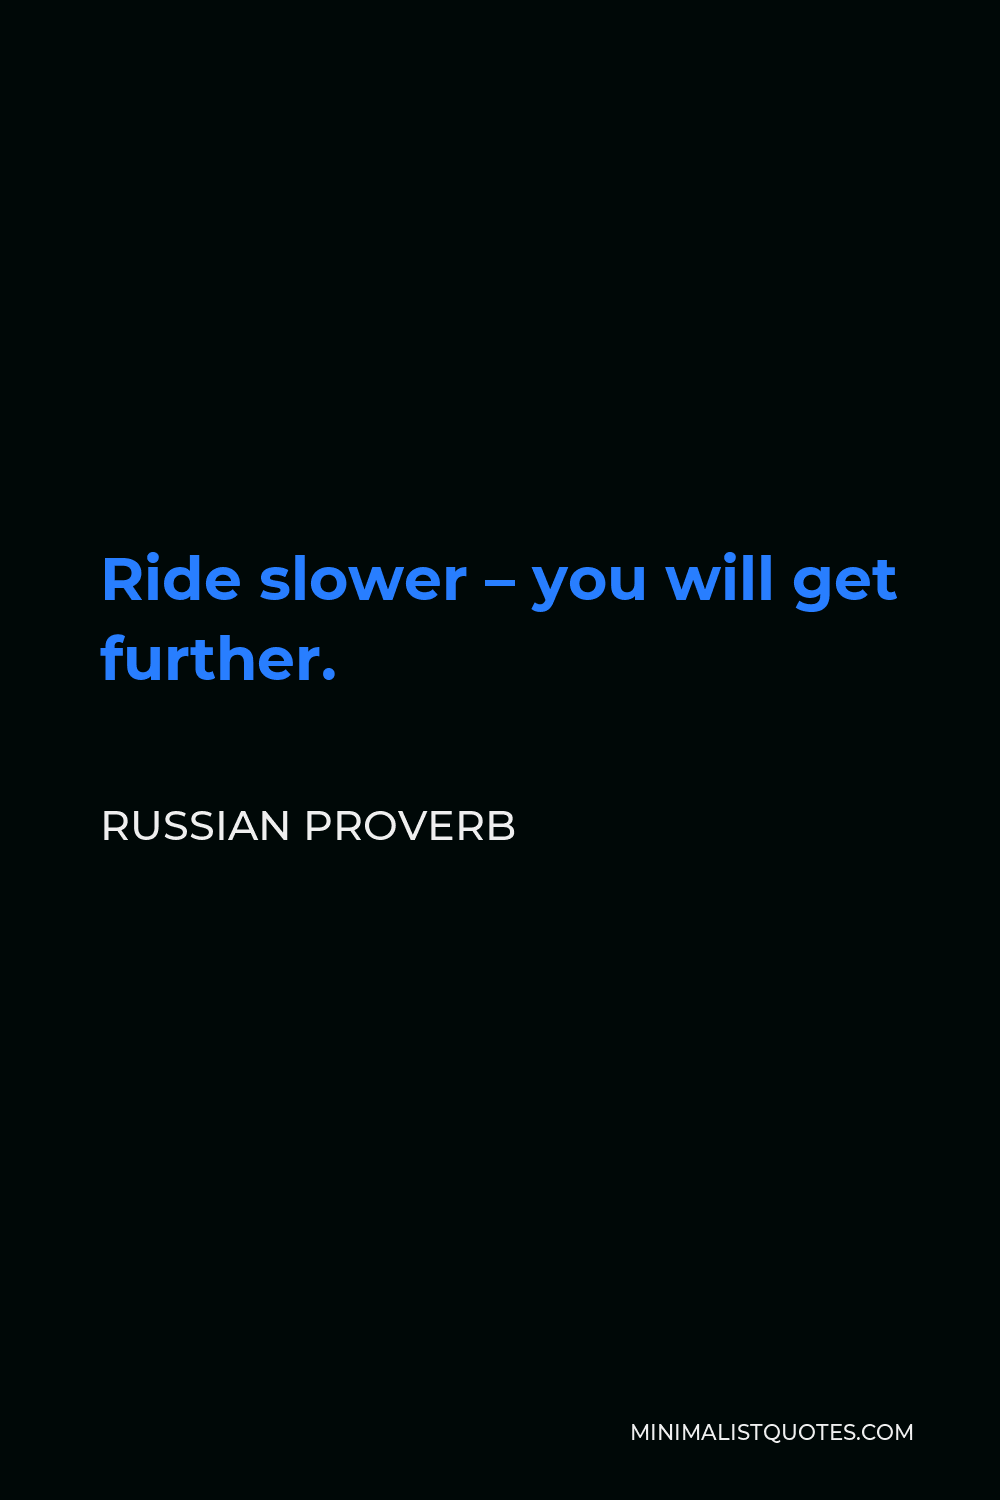 Russian Proverb Quote - Ride slower – you will get further.